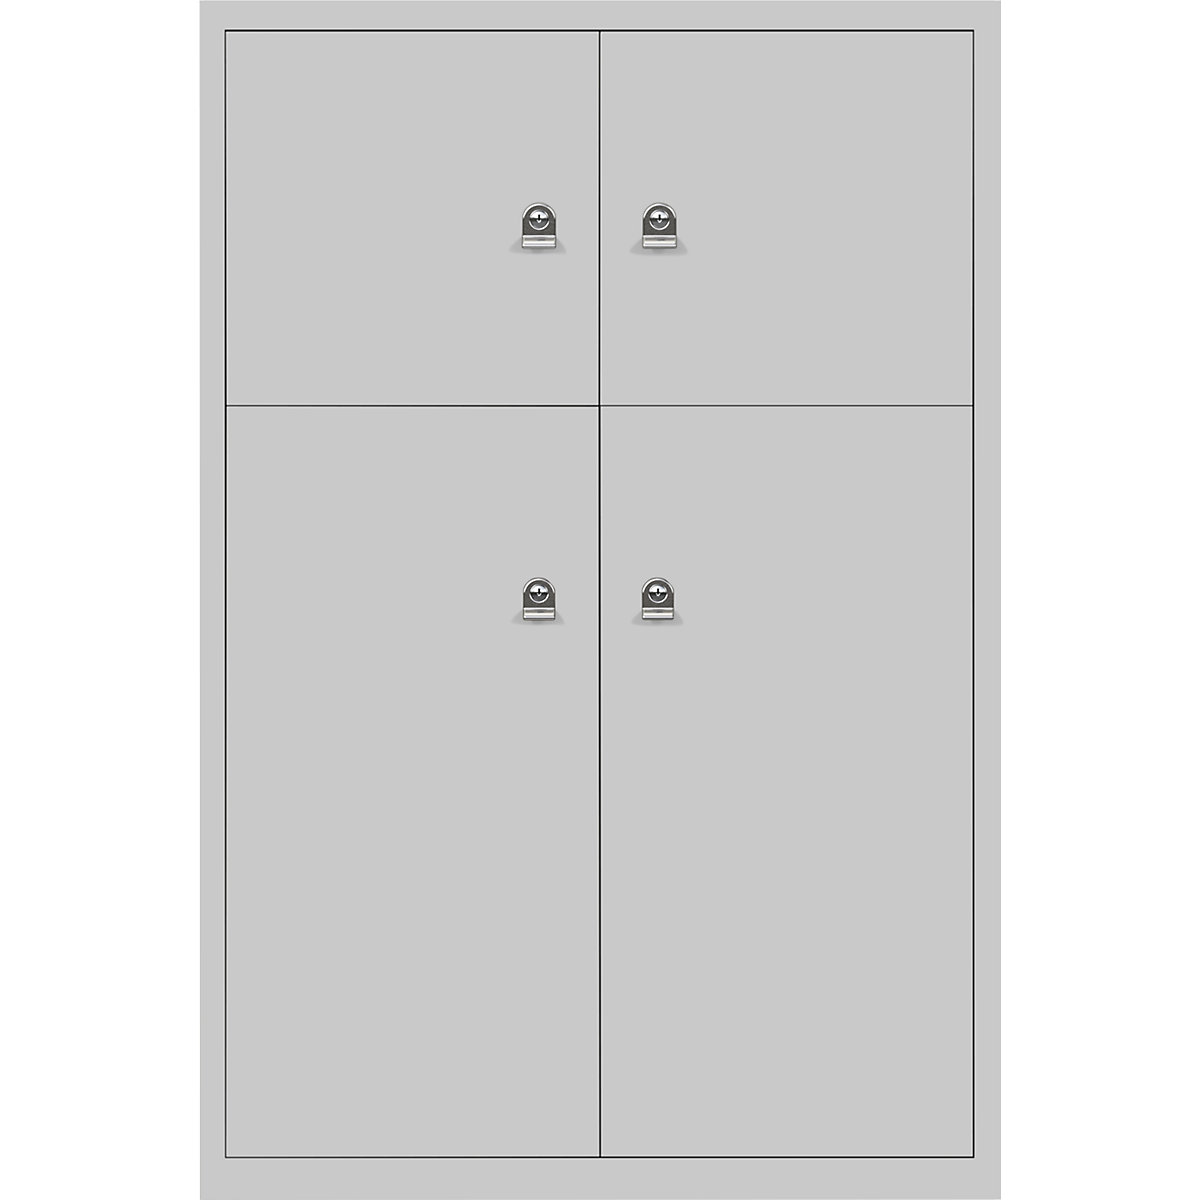 BISLEY – LateralFile™ lodge, with 4 lockable compartments, height 2 x 375 mm, 2 x 755 mm, goose grey